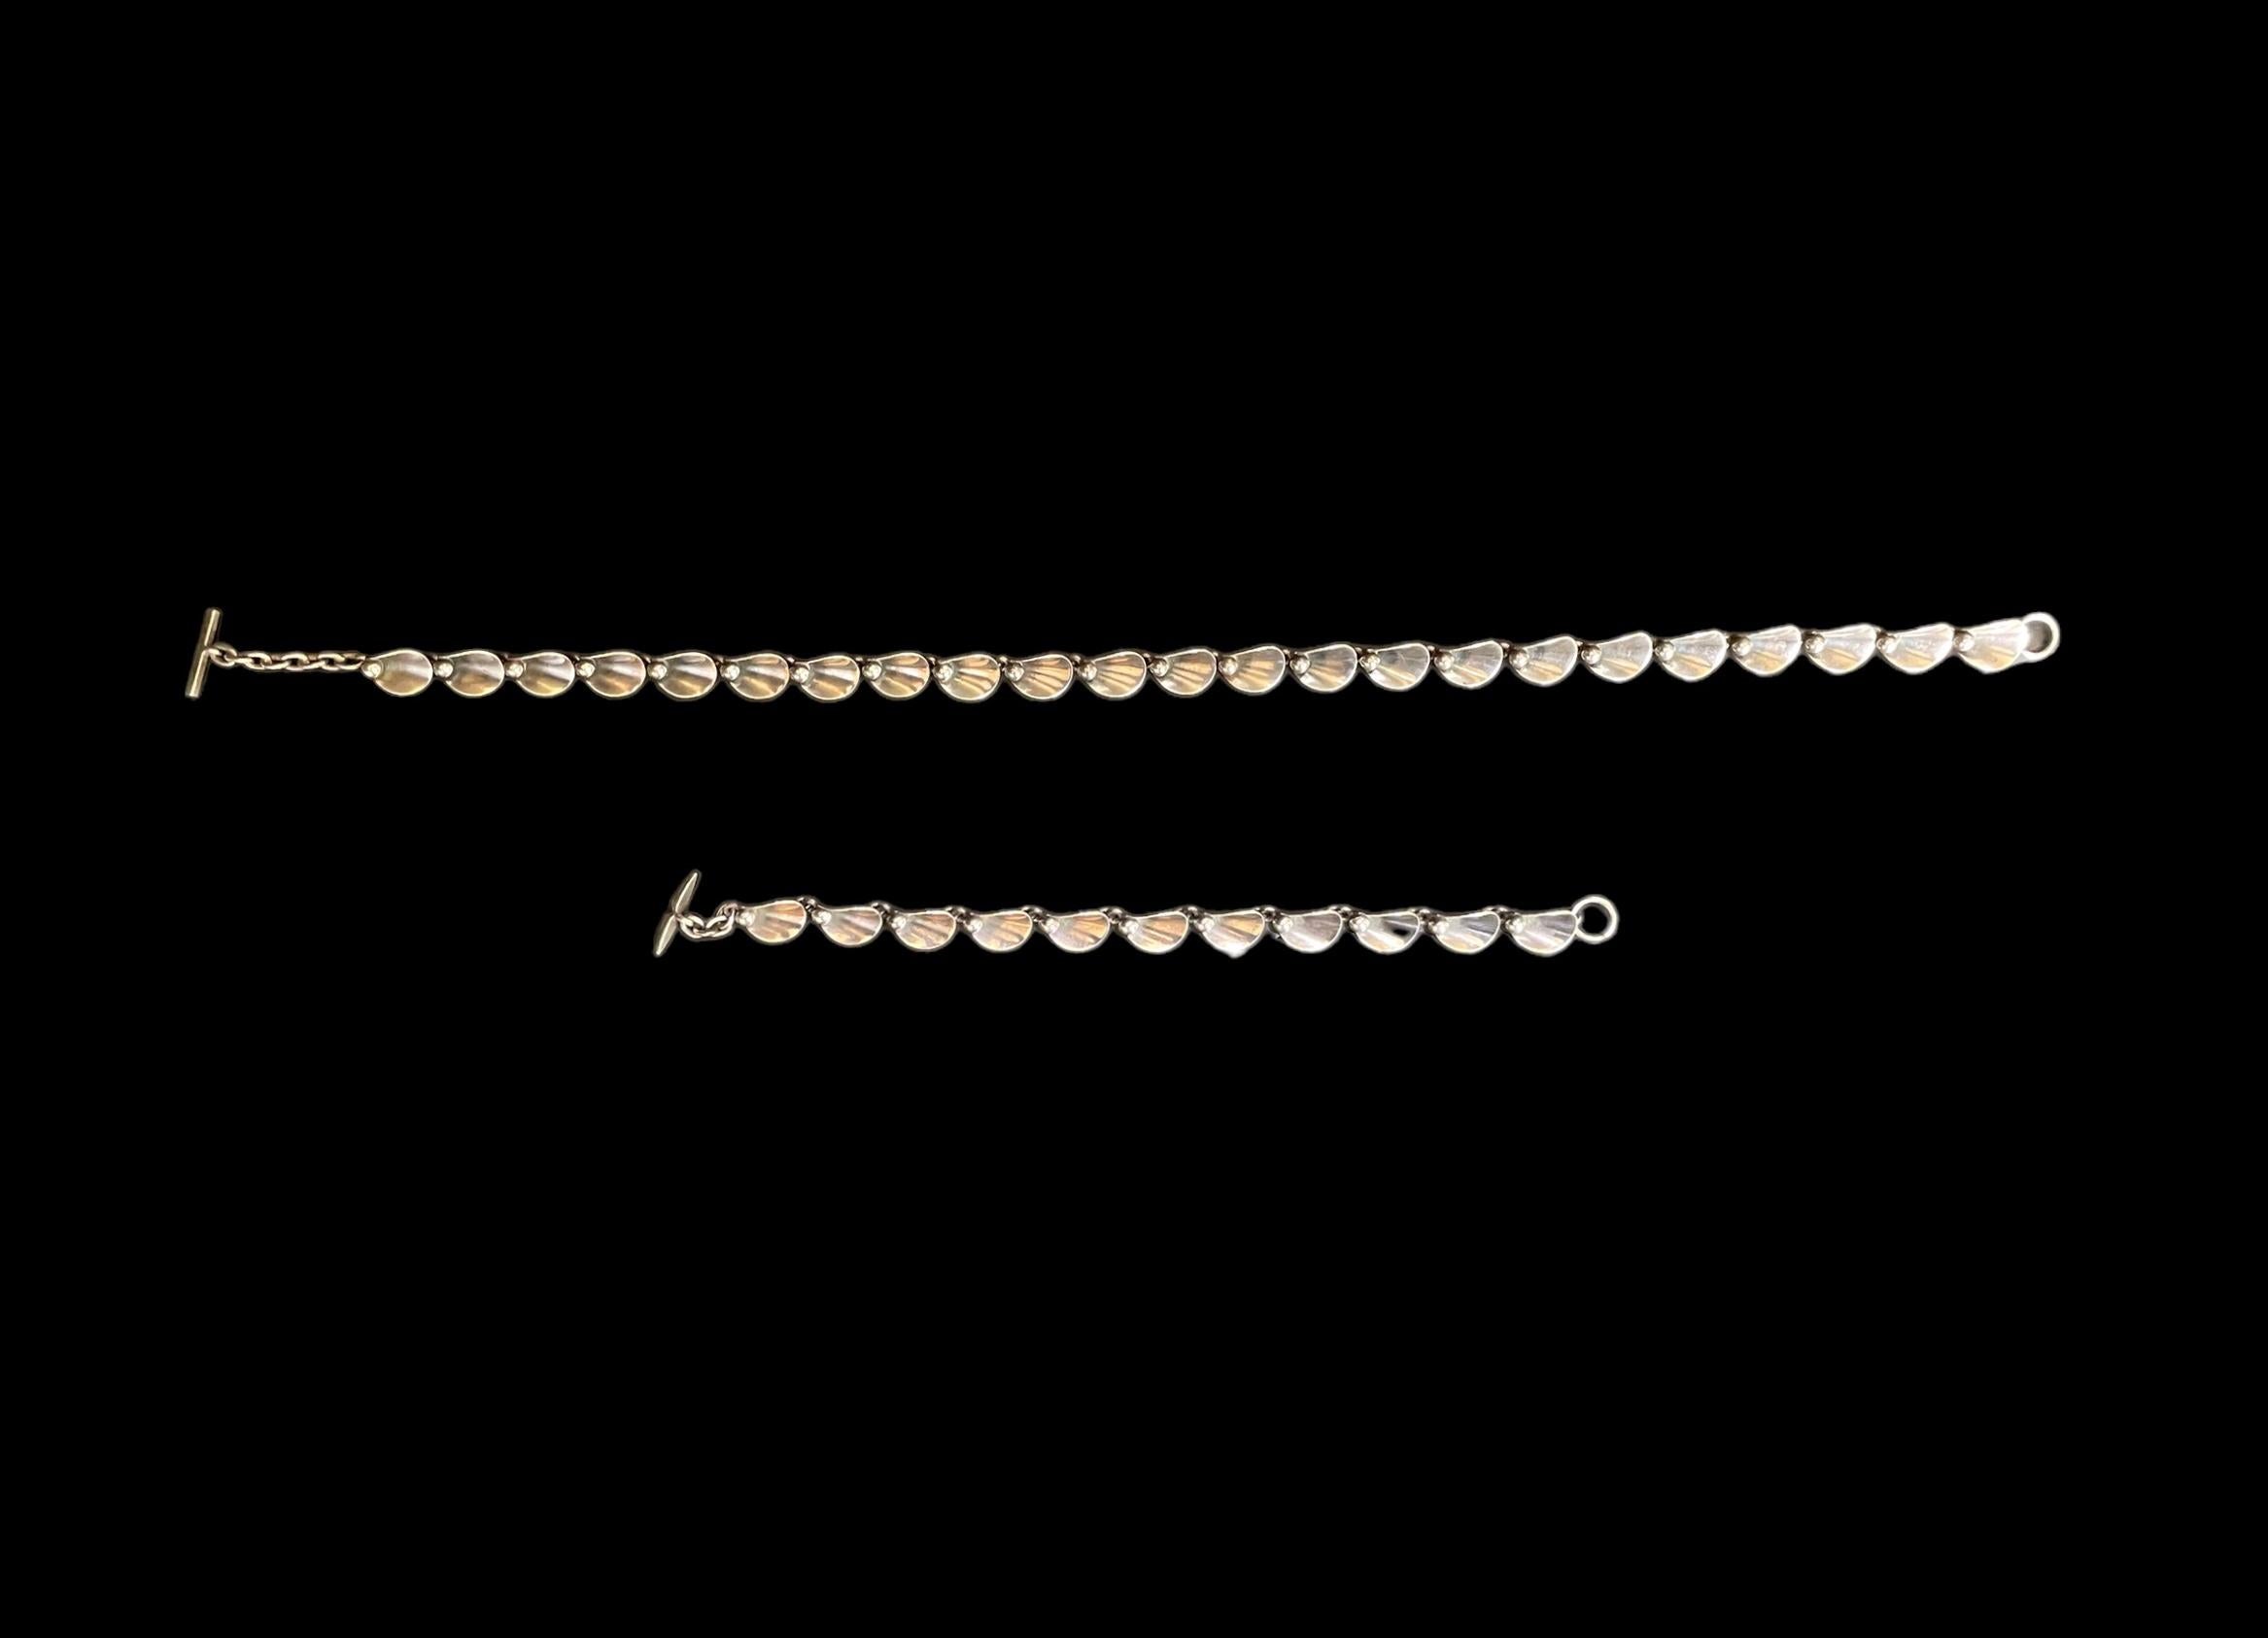 A silver necklace and bracelet by the Danish jeweller and silversmith Niels Erik From (1908-1982).
Initially his work was inspired by the Arts and Crafts movement but by the 1960’s he had developed a modernist style, as seen in these pieces based on